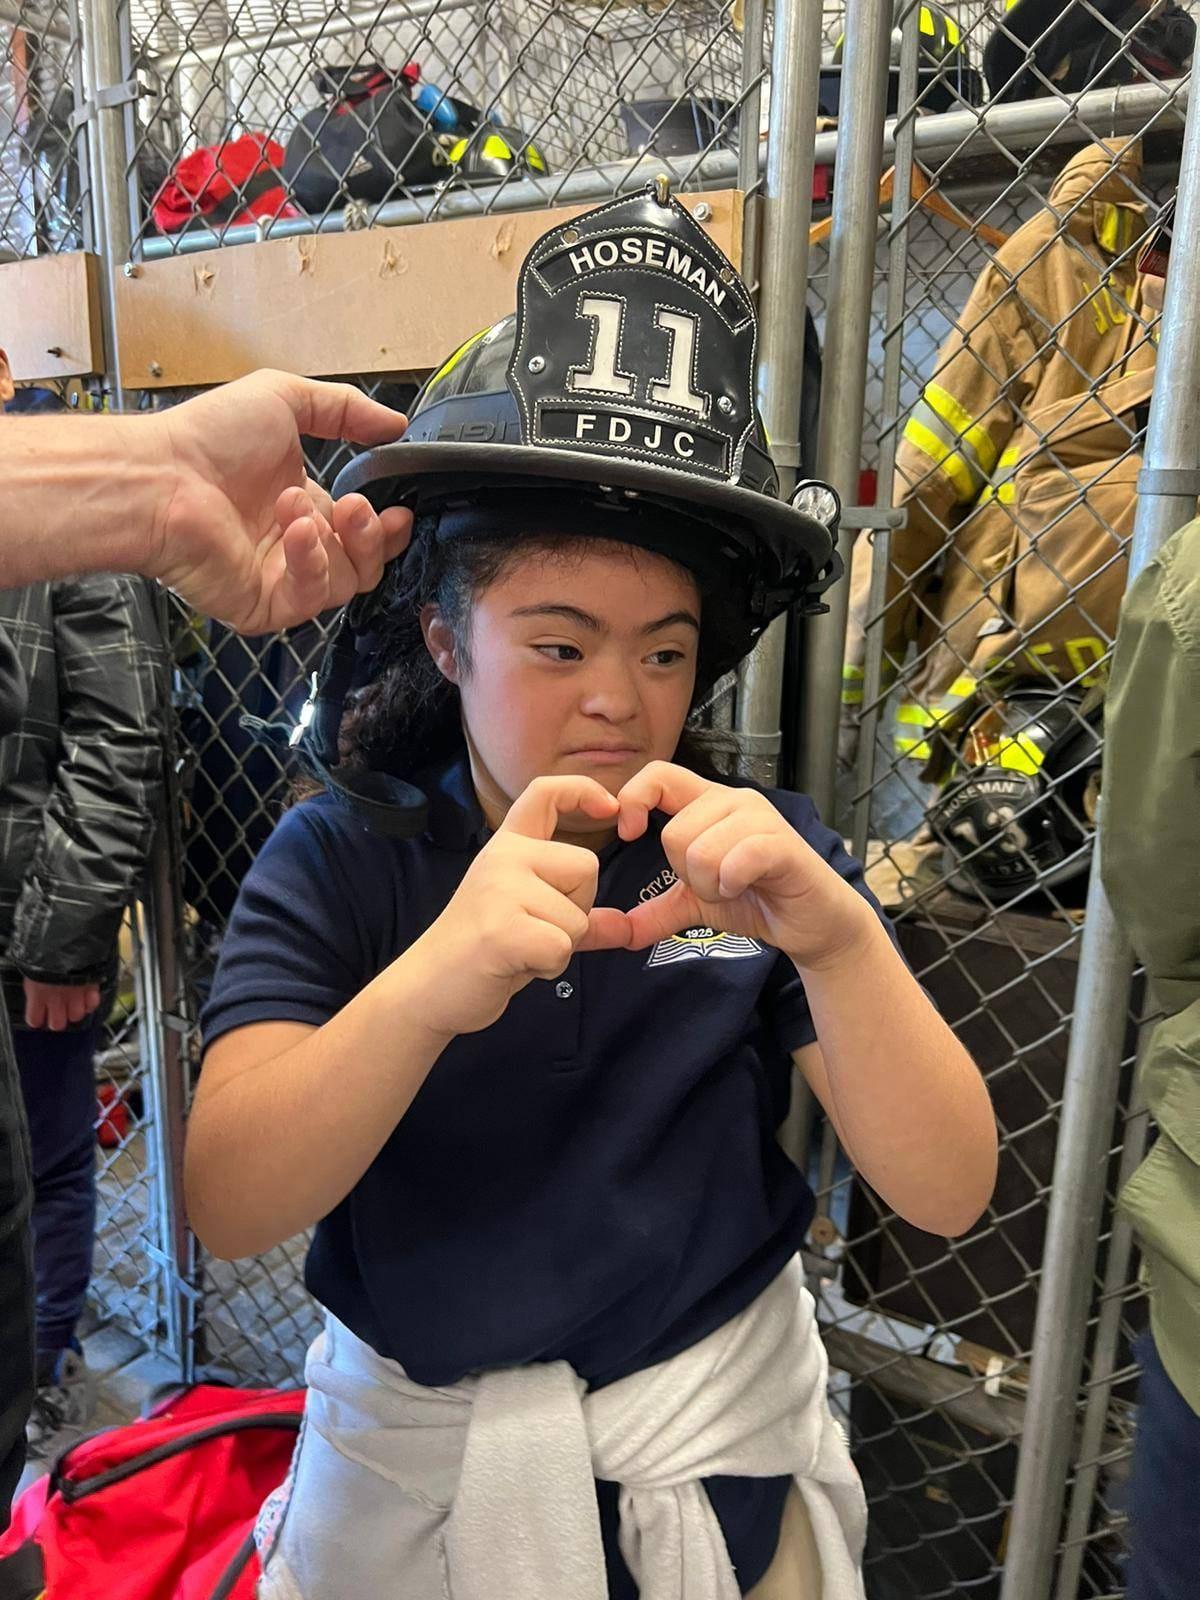 Fire Safety for Union Hill Middle School Students